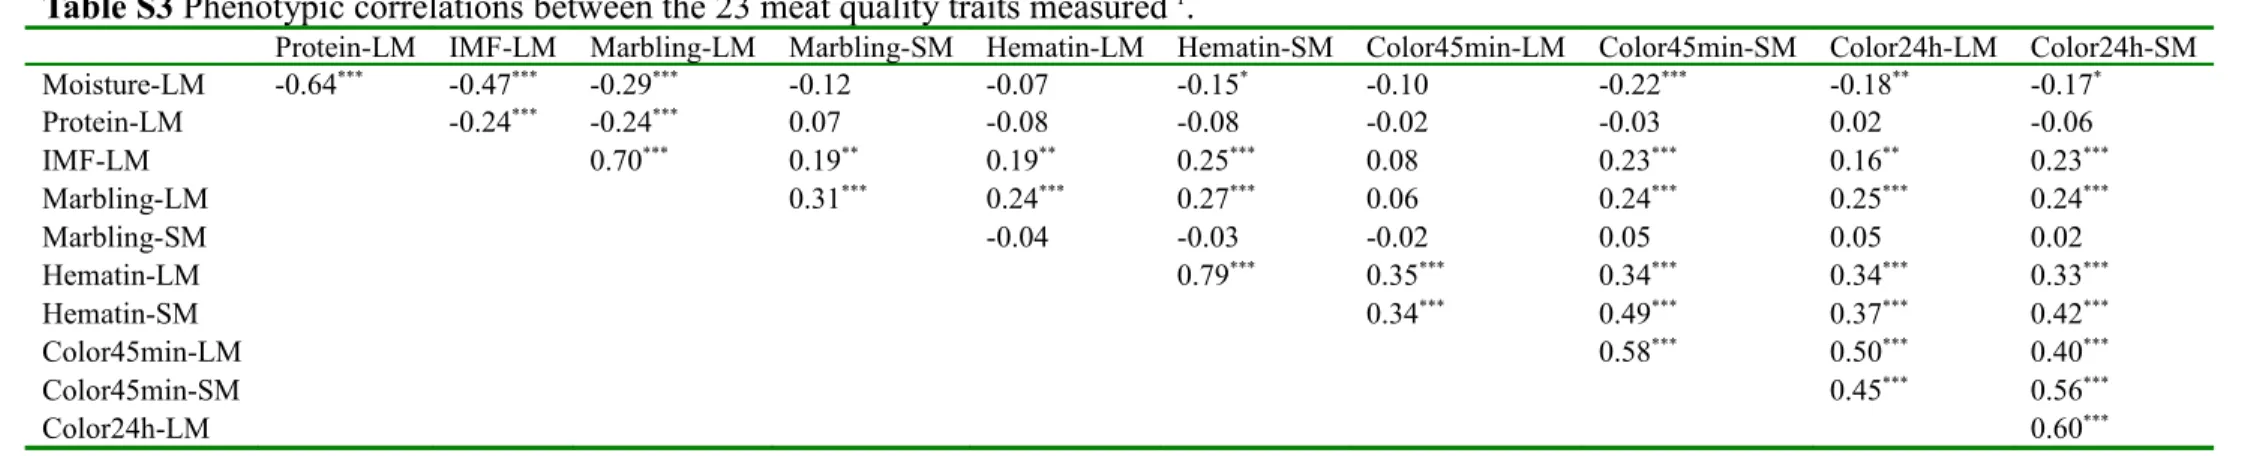 Table S3 Phenotypic correlations between the 23 meat quality traits measured  1 .